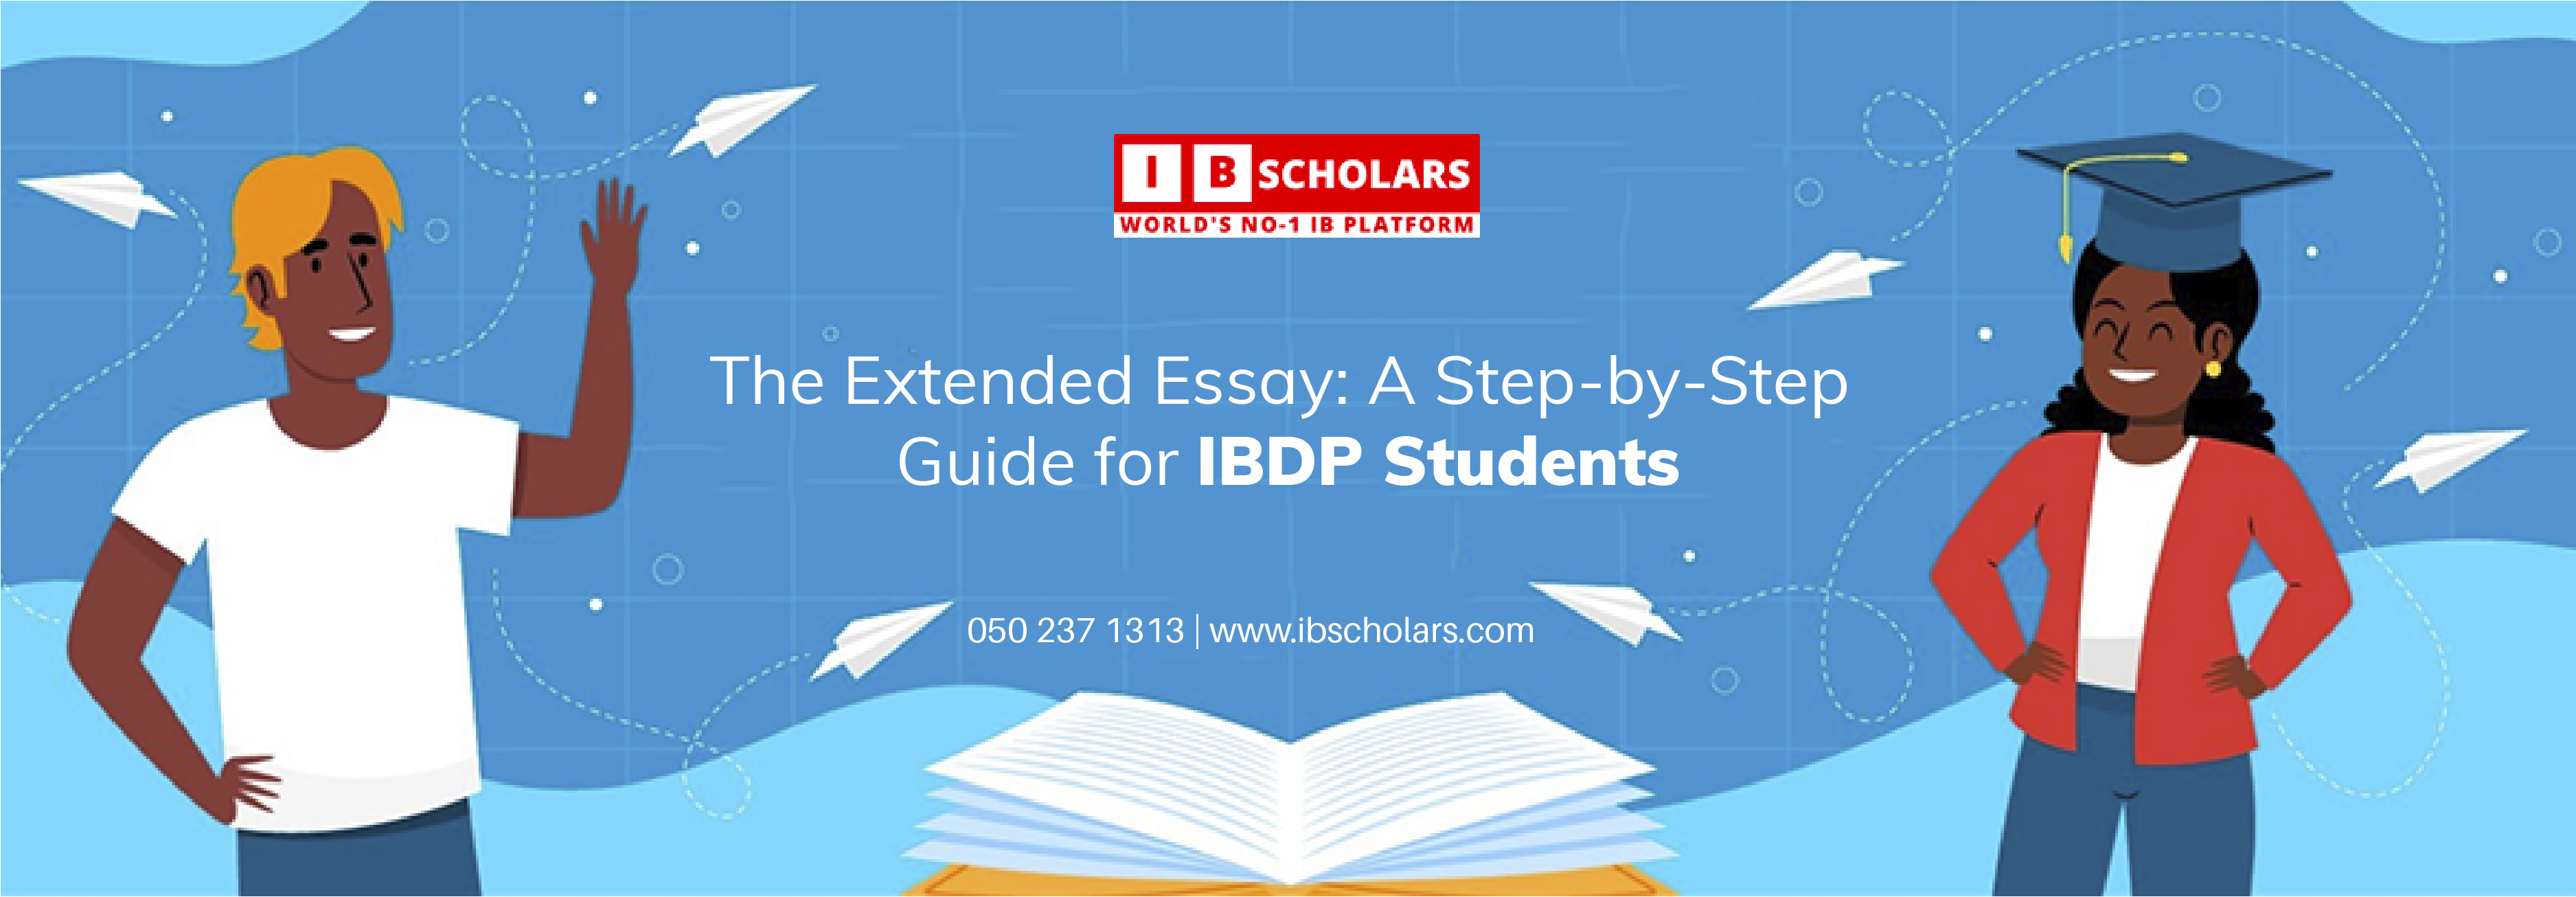 ib diploma programme extended essay guide